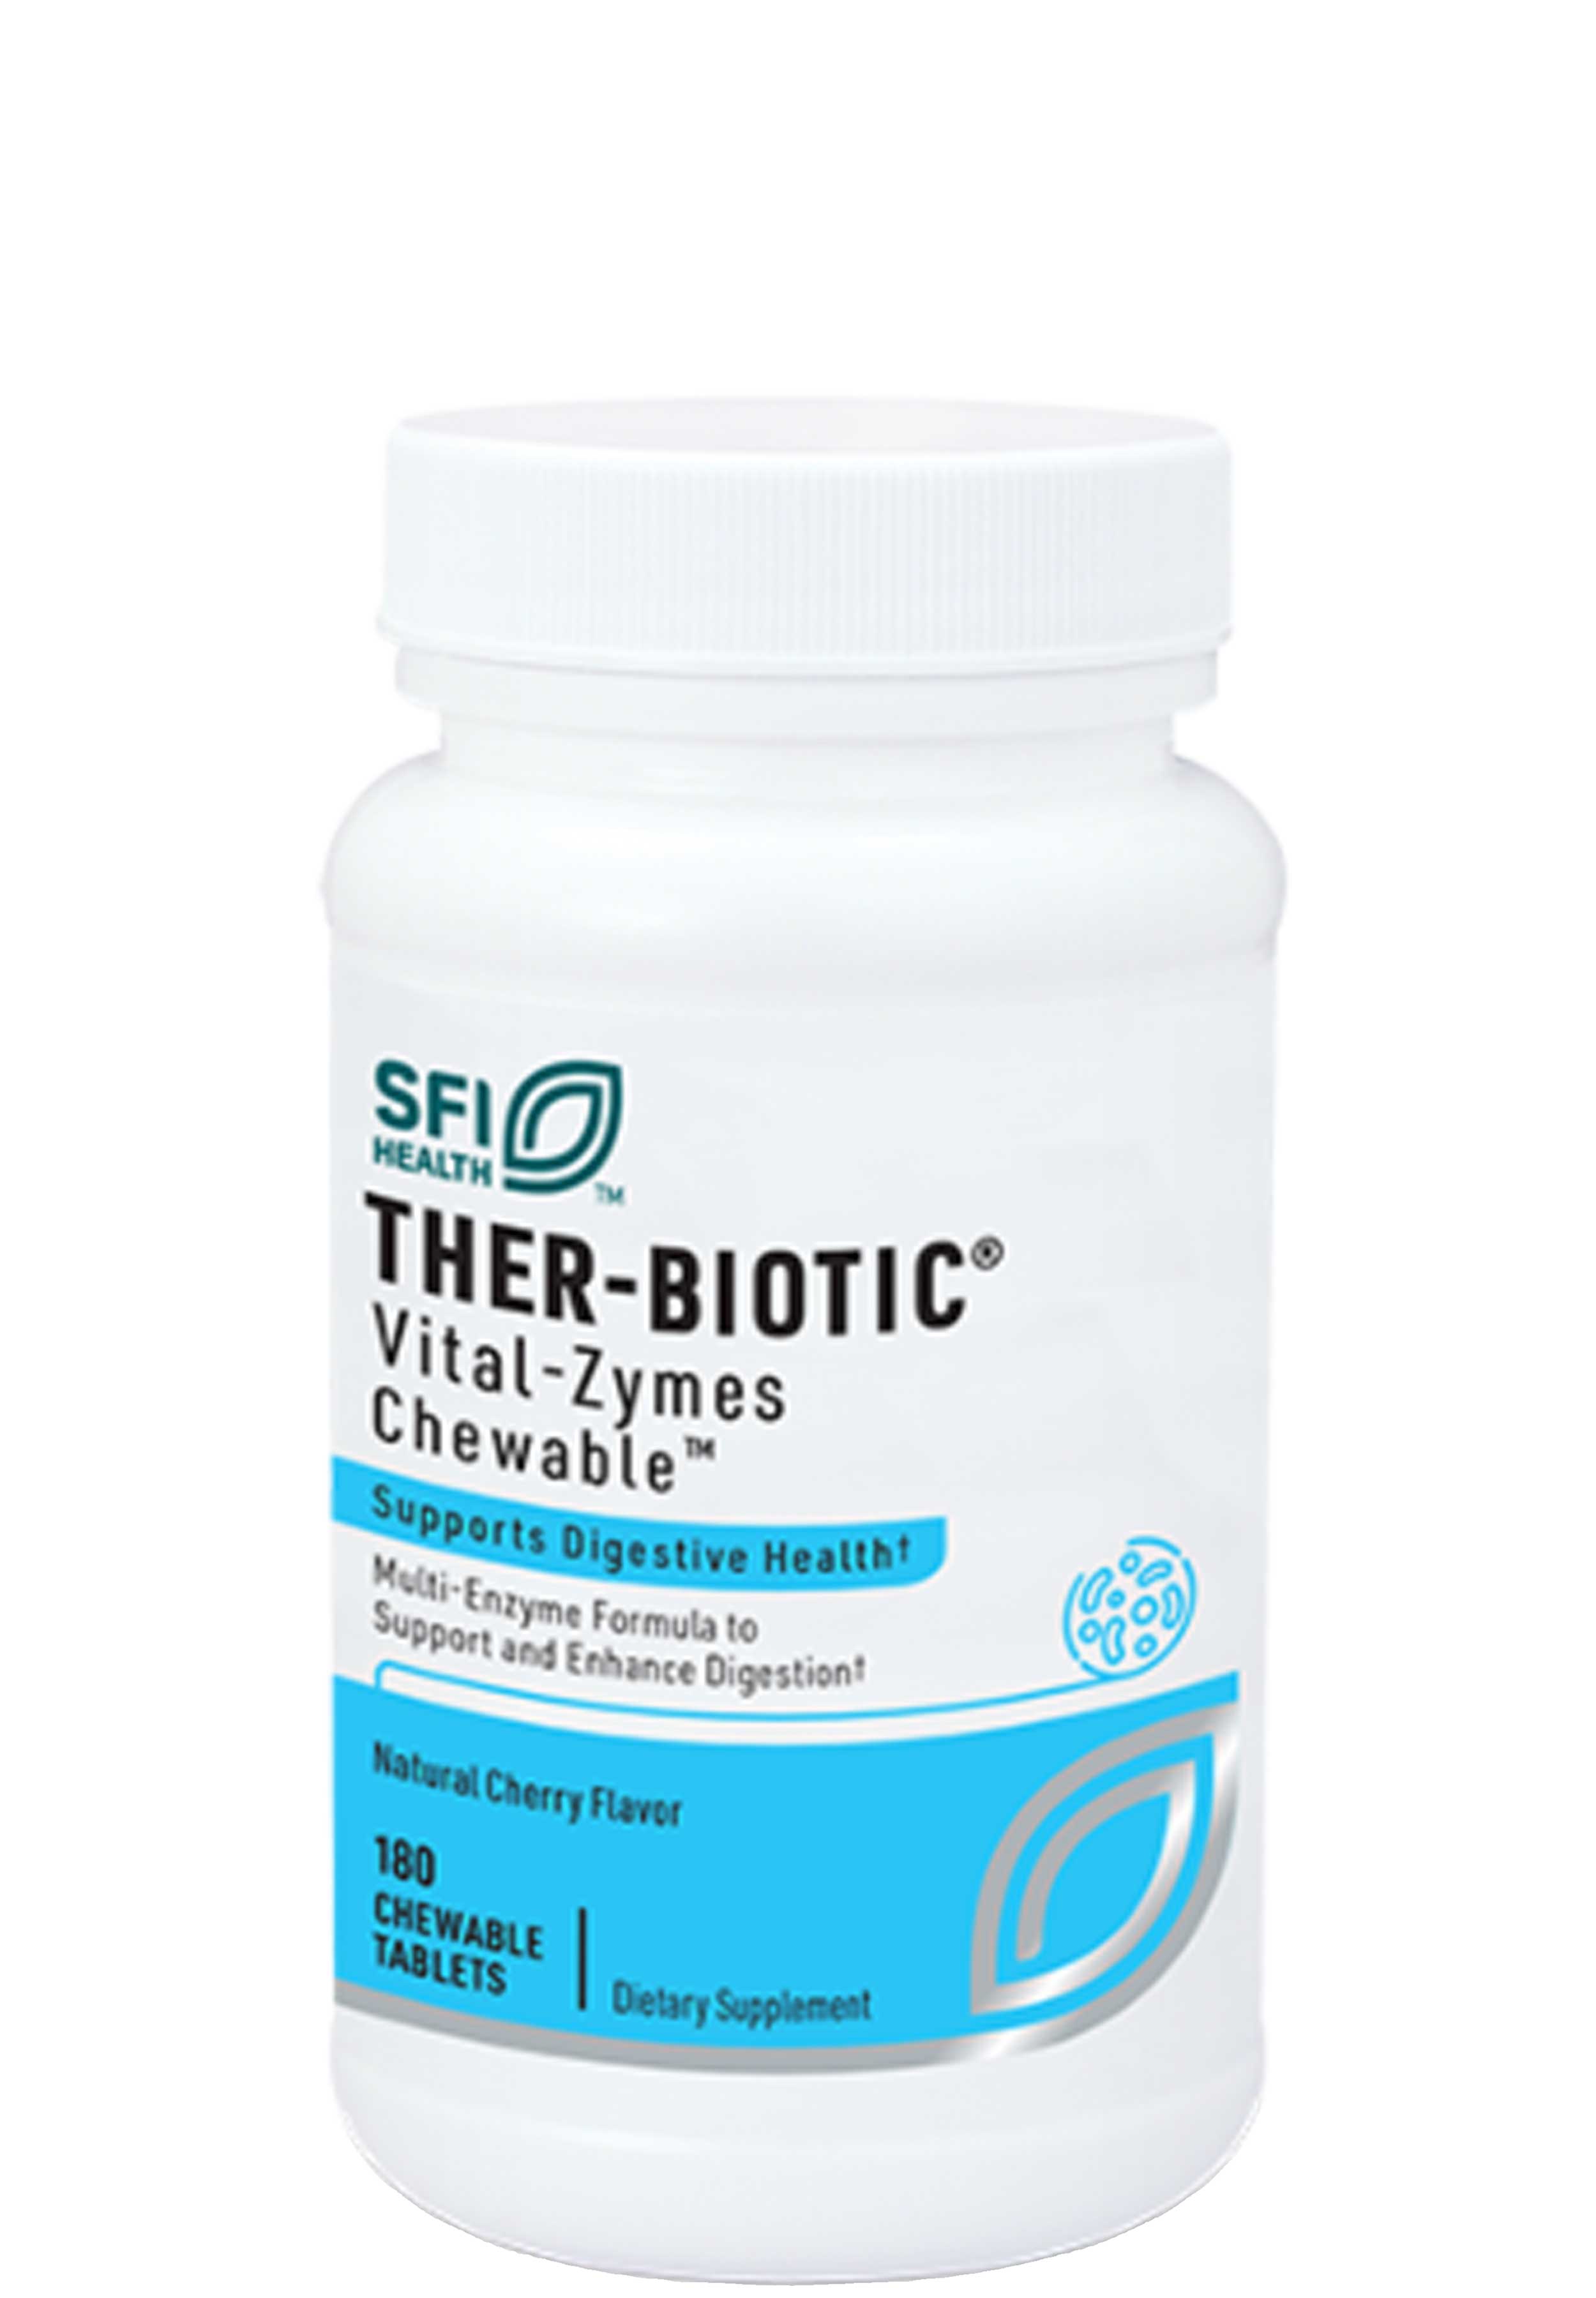 Klaire Labs Ther-Biotic Vital-Zymes Chewable